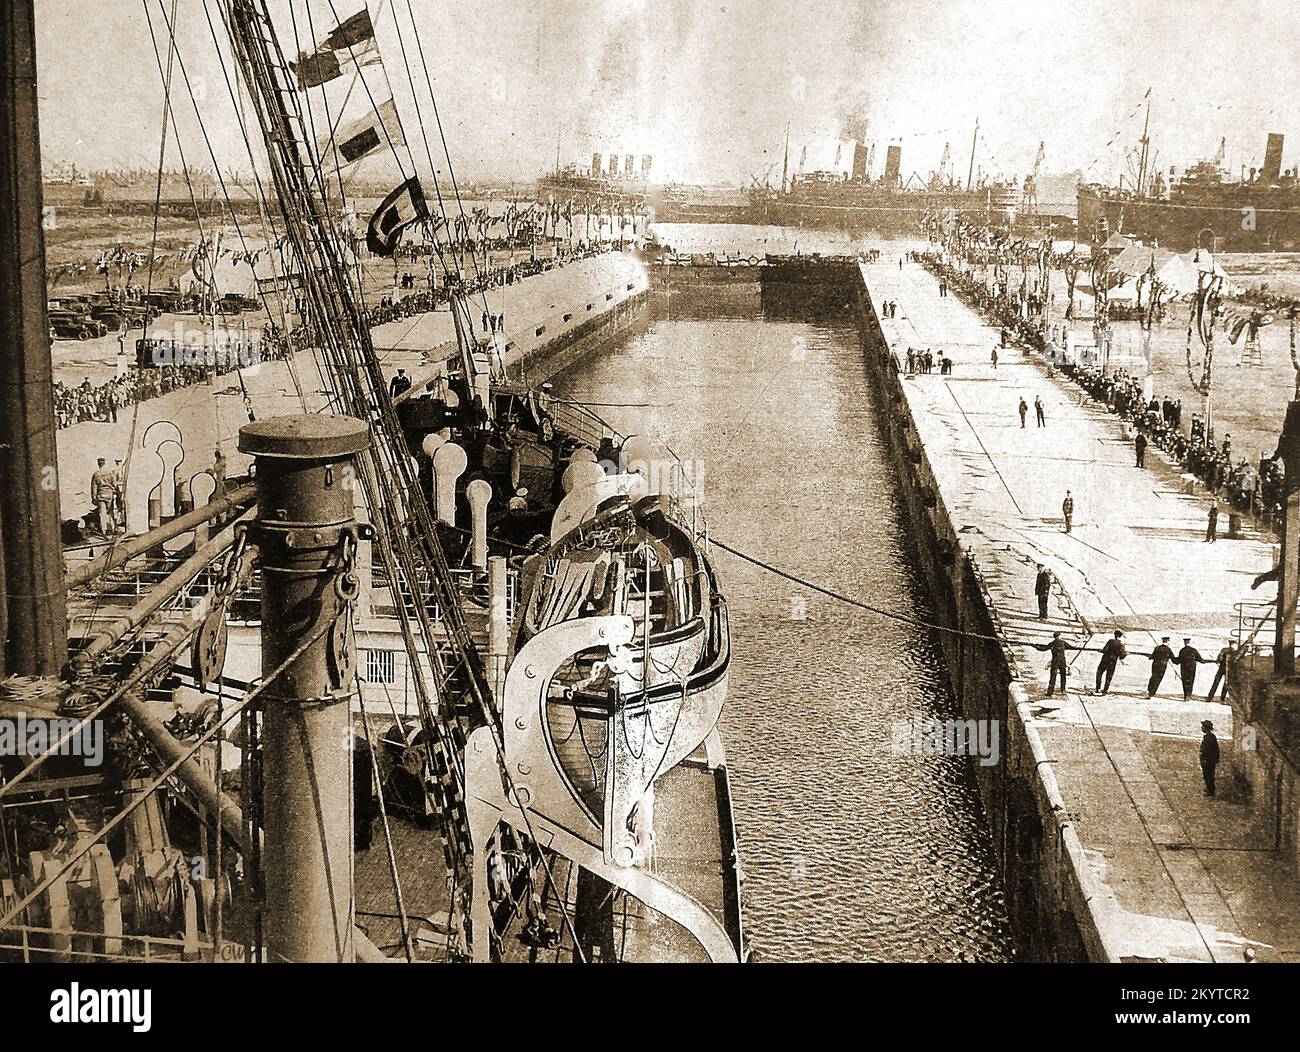 A 1940's image of a ship entering the dry dock at Tilbury Docks, UK Stock Photo